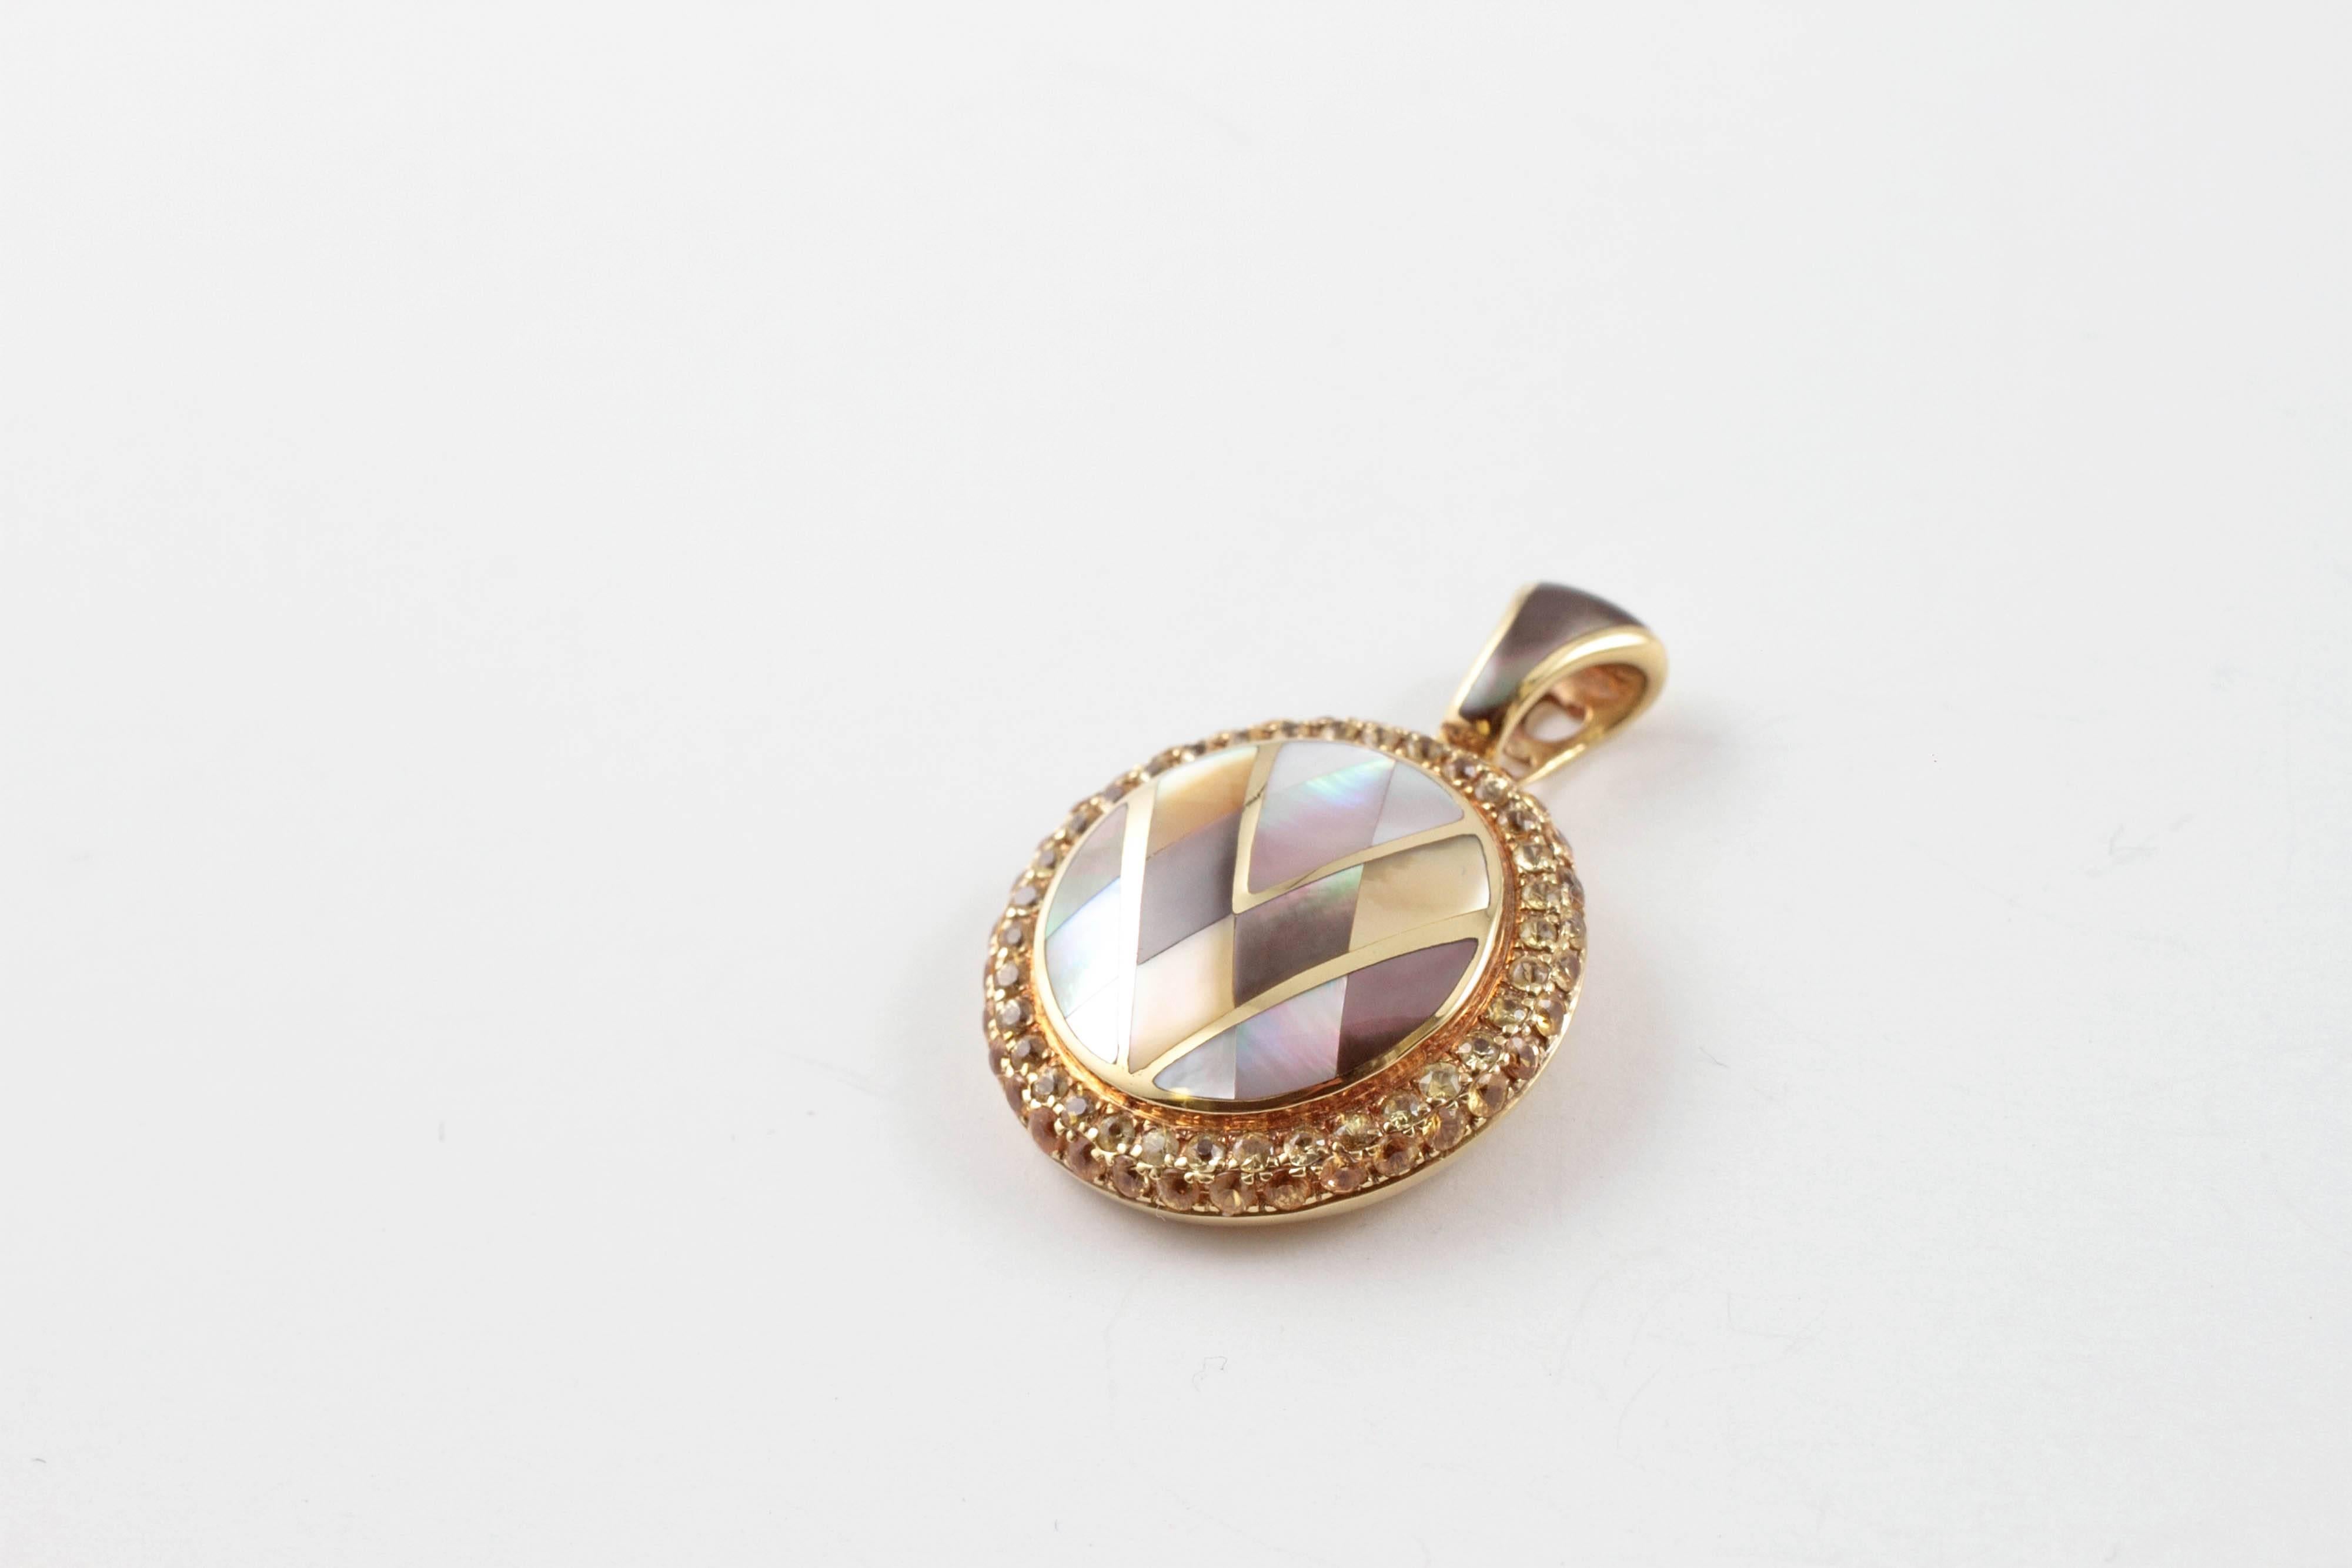 A lovely 14 karat yellow gold, yellow sapphire and mother of pearl inlaid pendant by Asch Grossbardt!